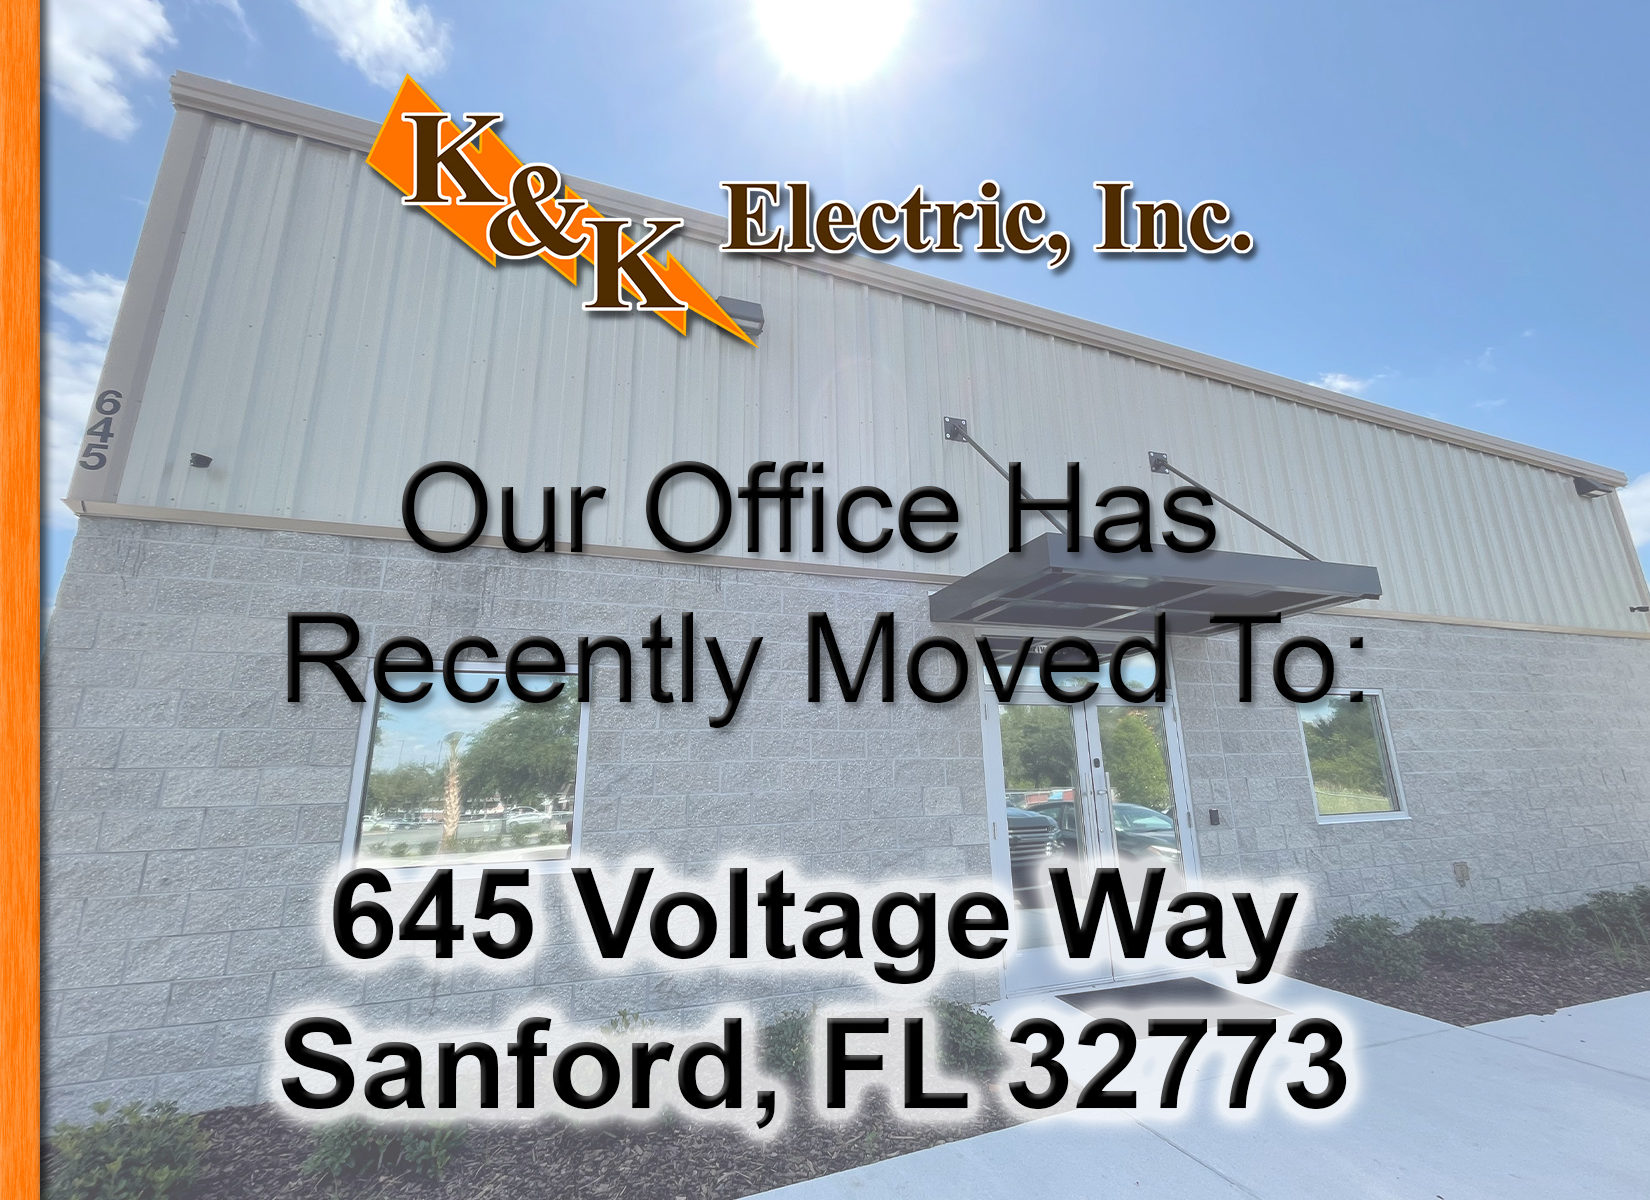 Our Office Has Recently Moved To: 645 Voltage Way, Sanford, FL 32773